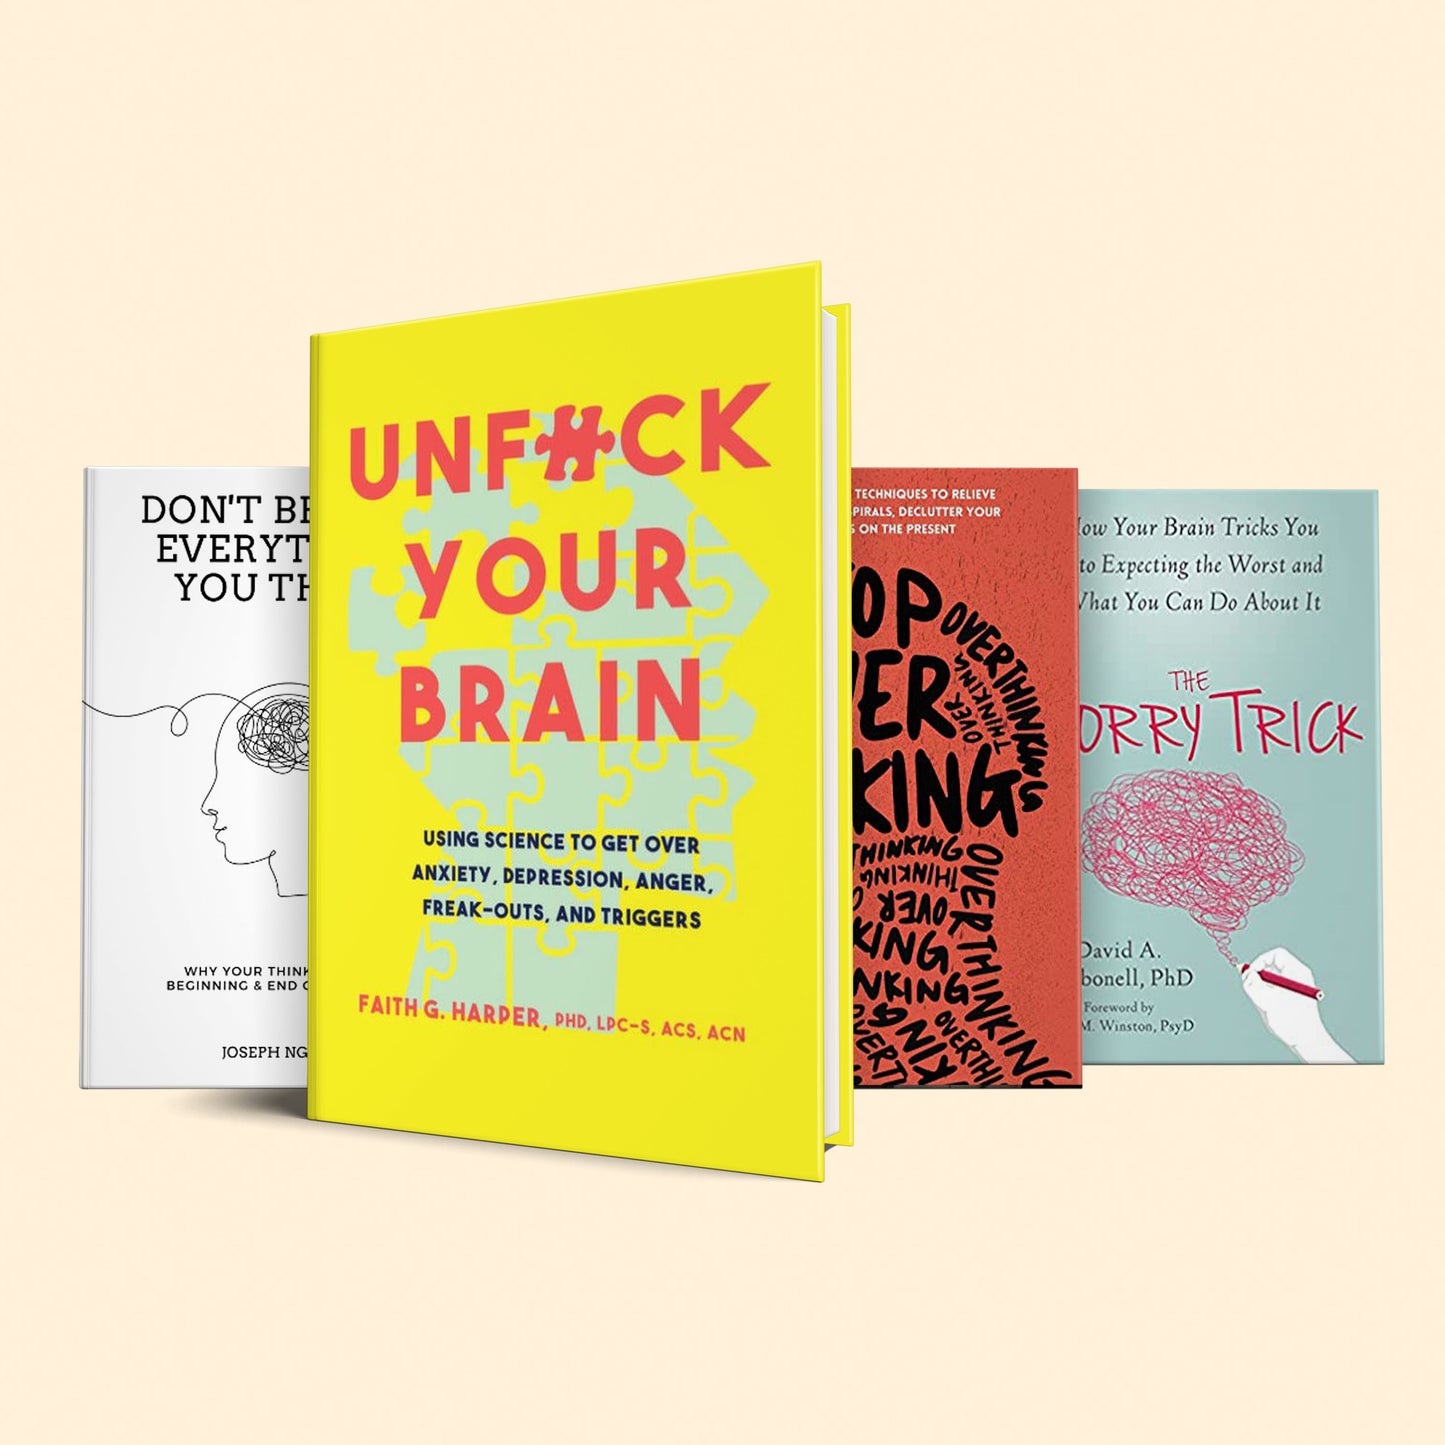 4 Books To stop overthinking ( Unf#ck Your Brain, Stop Overthinking, Don't Believe Everything You Think, The Worry Trick)